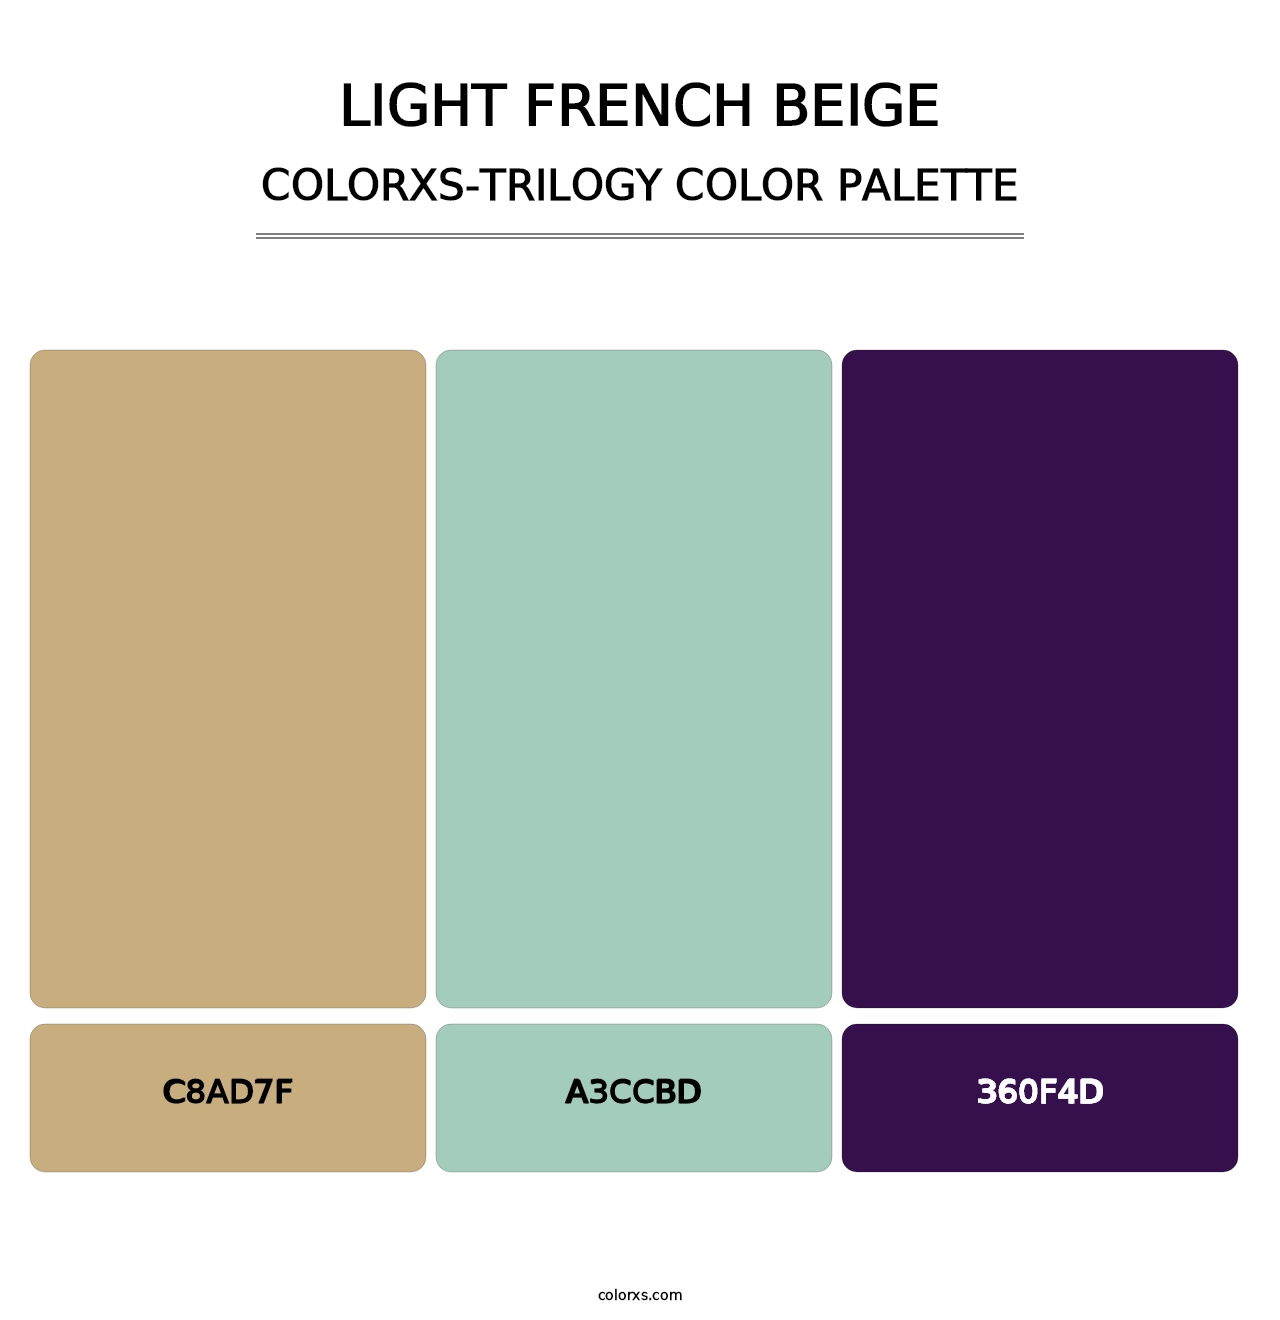 Light French Beige - Colorxs Trilogy Palette